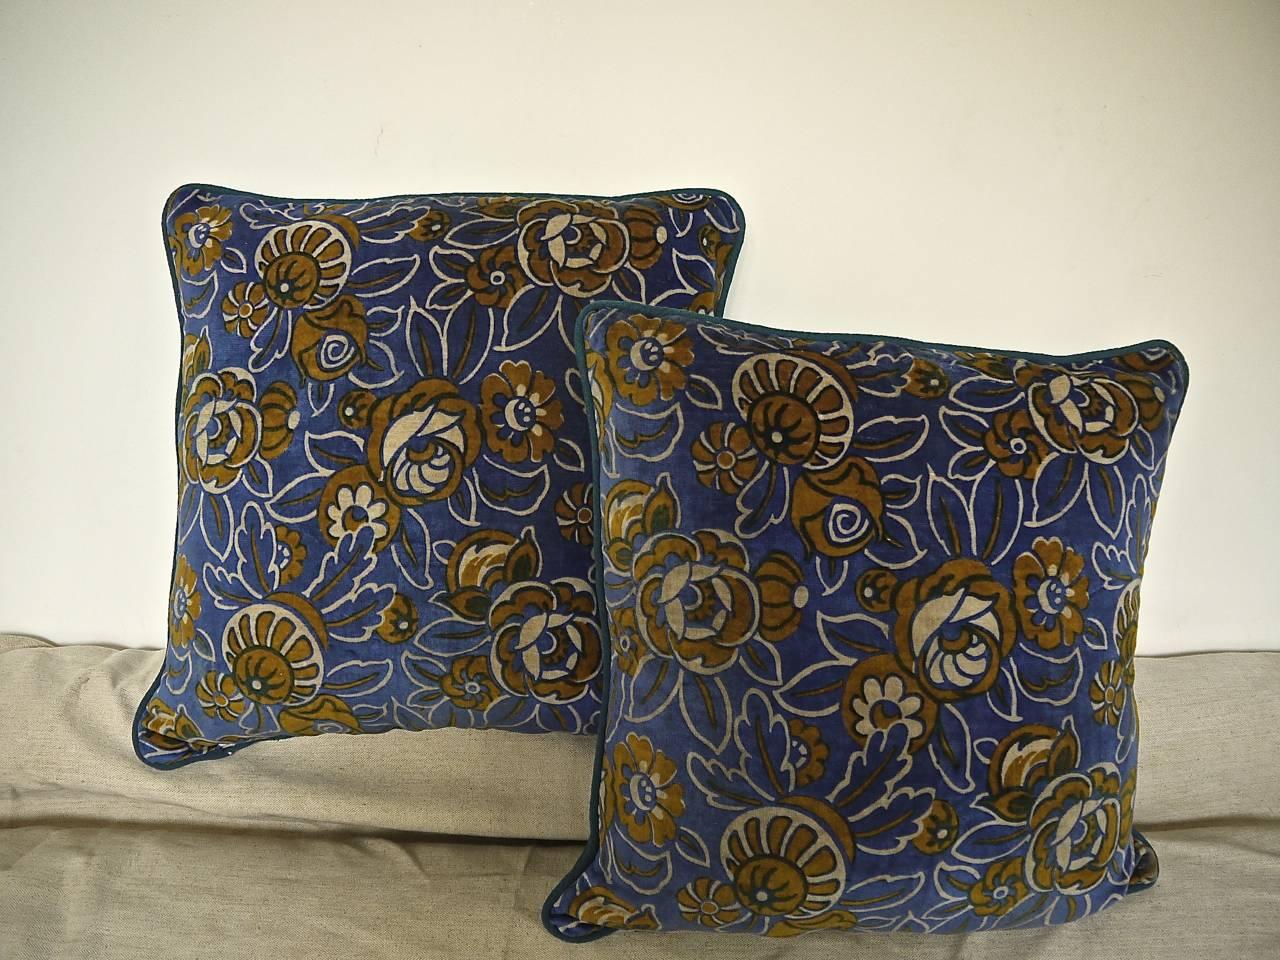 French 1920s Art Deco Tan and Blue Floral Velvet Cushion For Sale 3